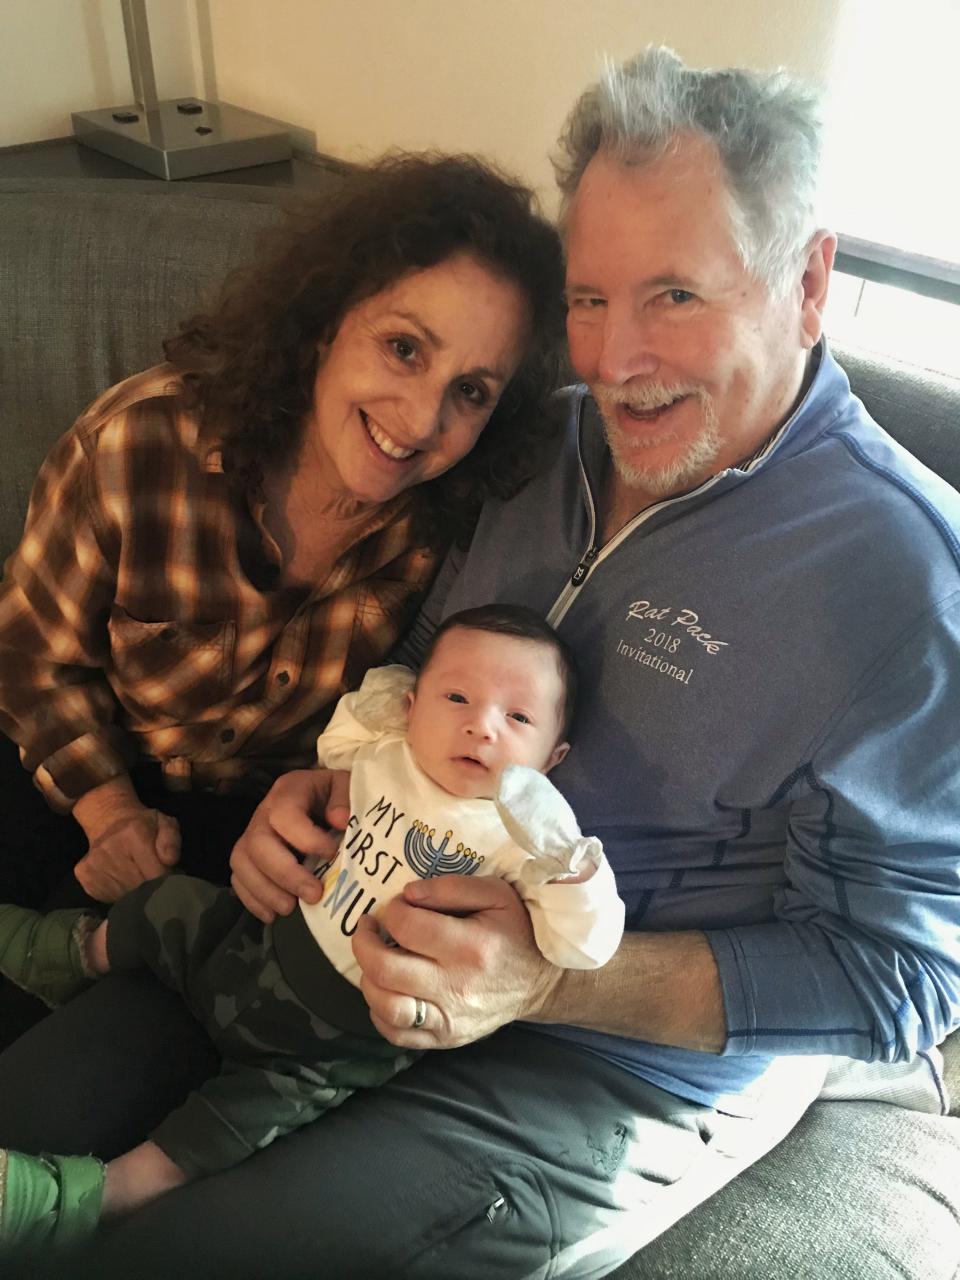 Steve Schlosberg sits with his wife, Leslie, and their grandson, Maxwell, in happier times. The Port Hueneme man is recovering from COVID-19